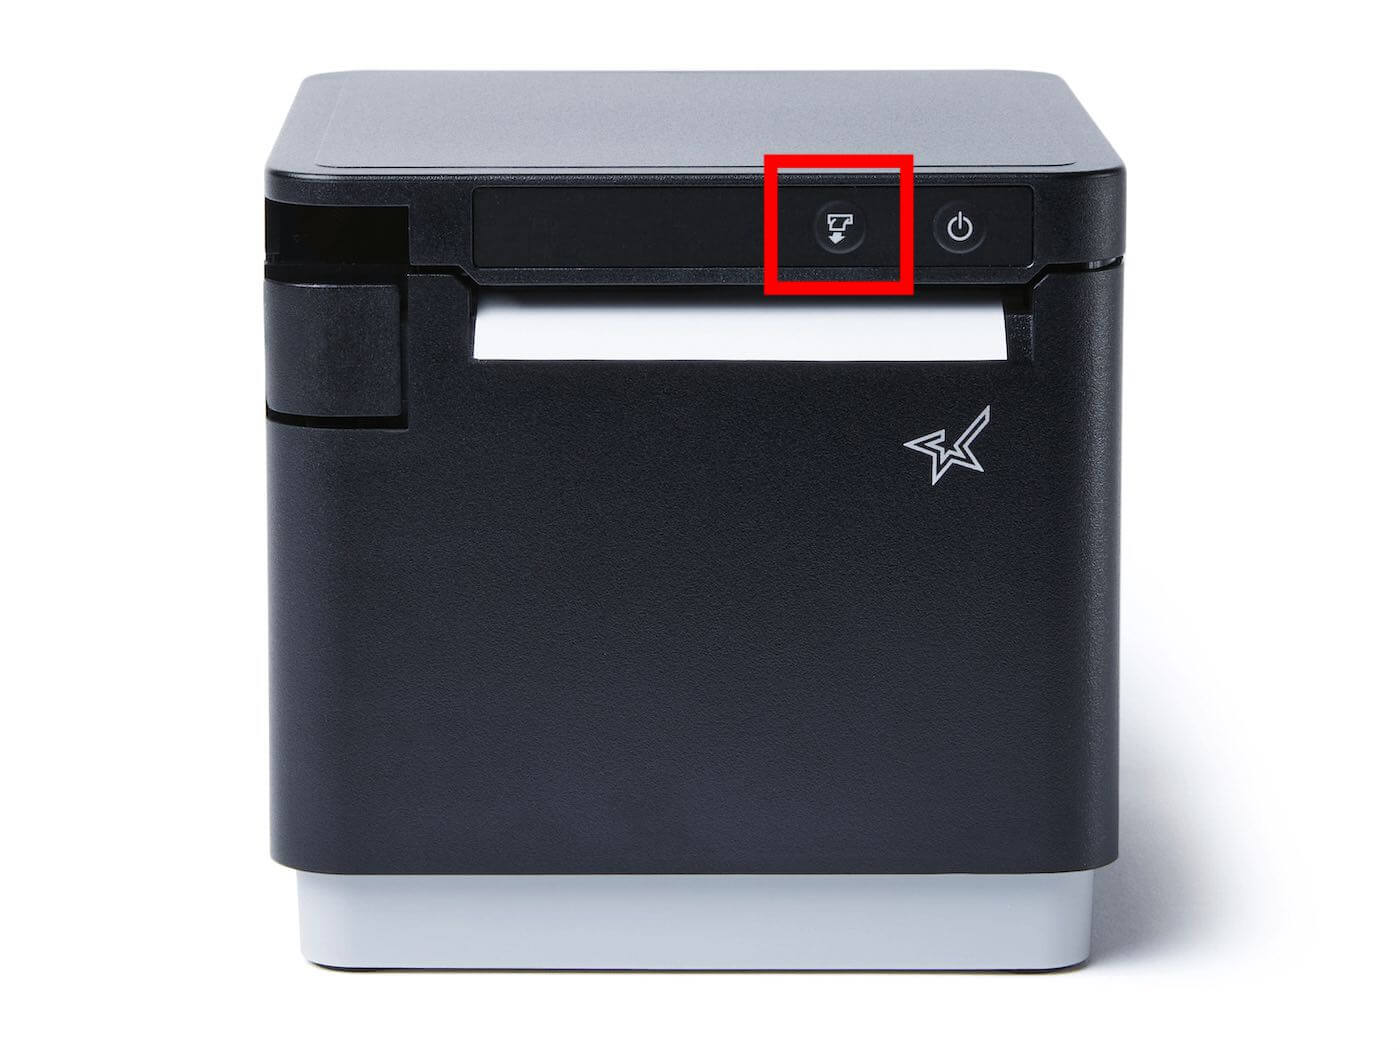 Printer with feed button highlighted